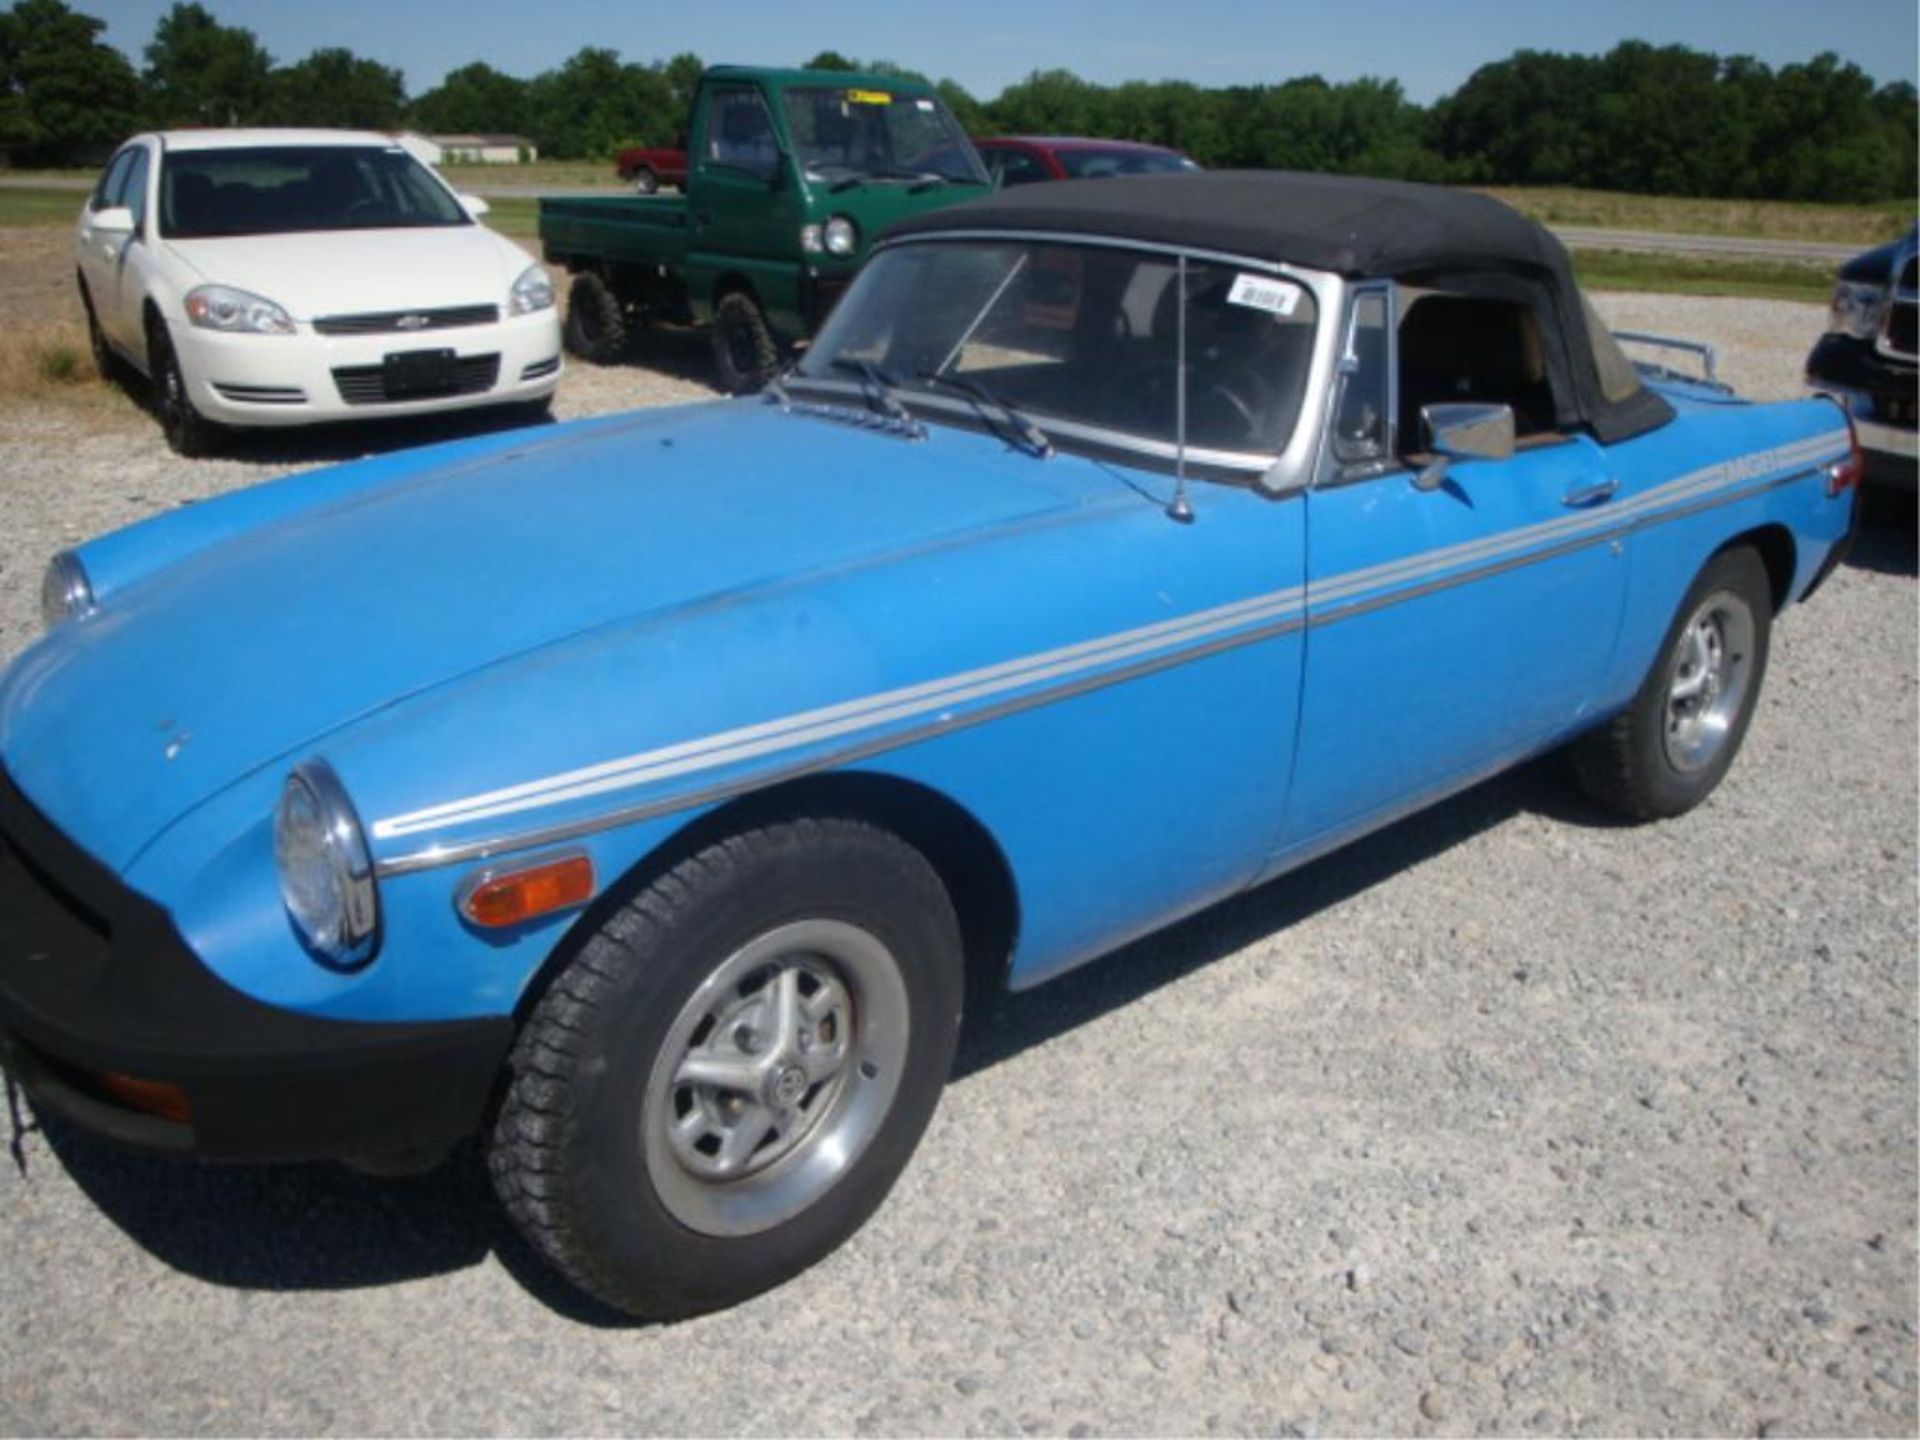 (Title) 1979 MGB, 14,890 miles on ODO,New in 2014: fuel pump, gas tank, clutch, radiator rodded - Image 2 of 34